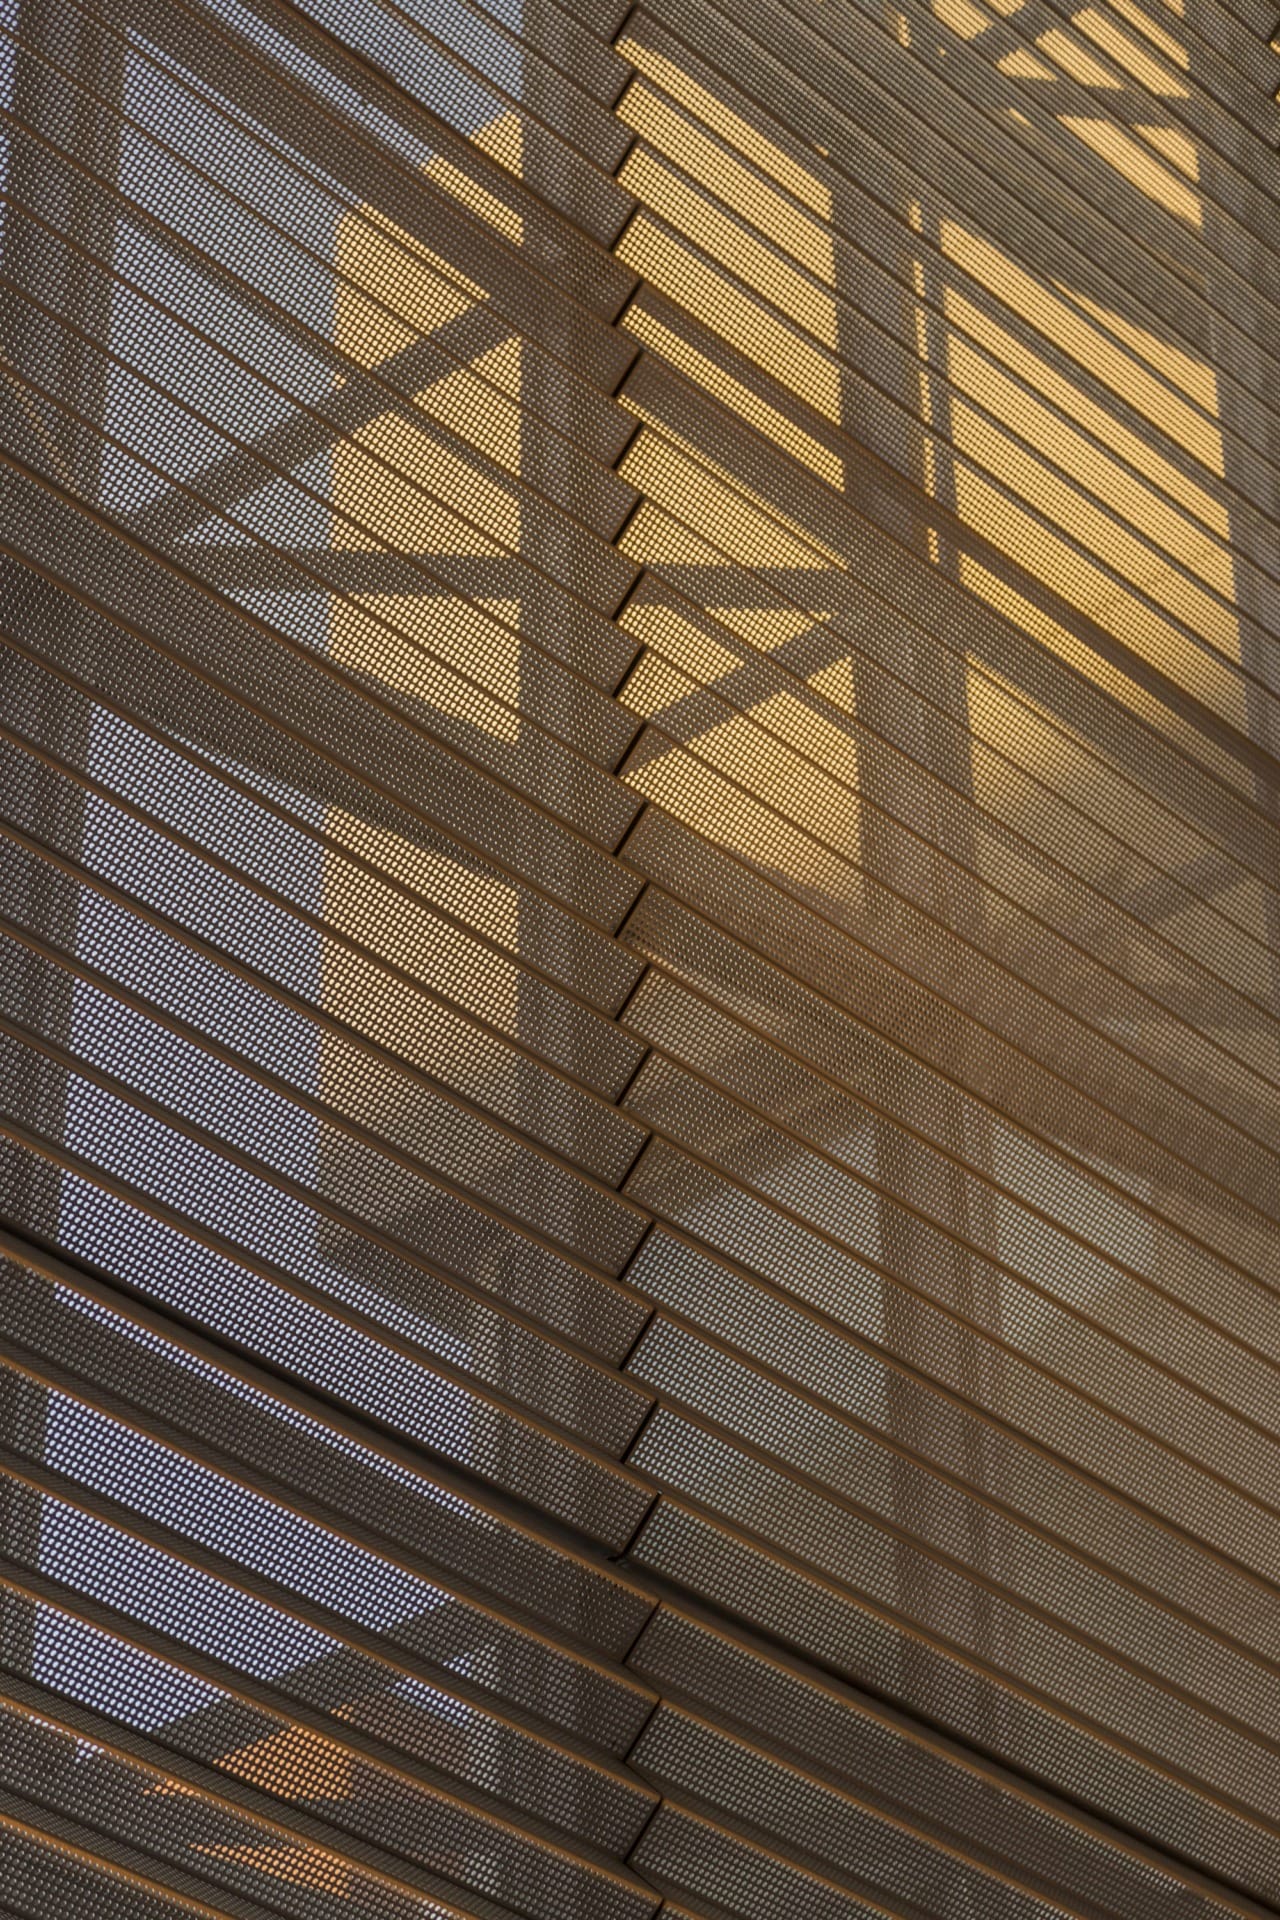 Detail of the perforated metal angle panels